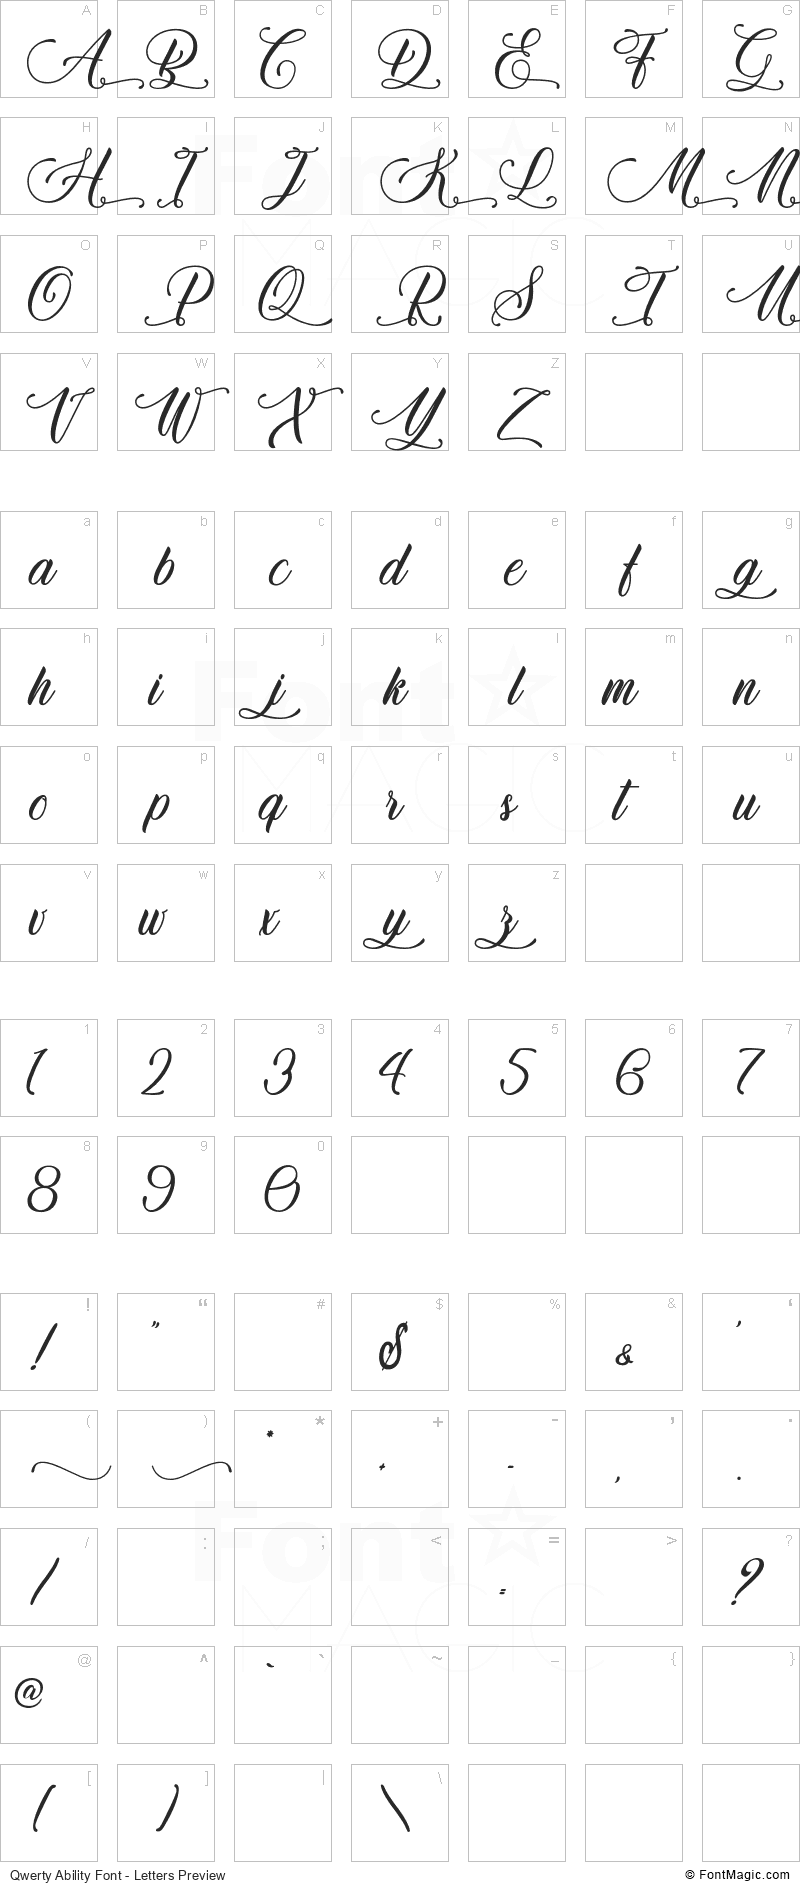 Qwerty Ability Font - All Latters Preview Chart